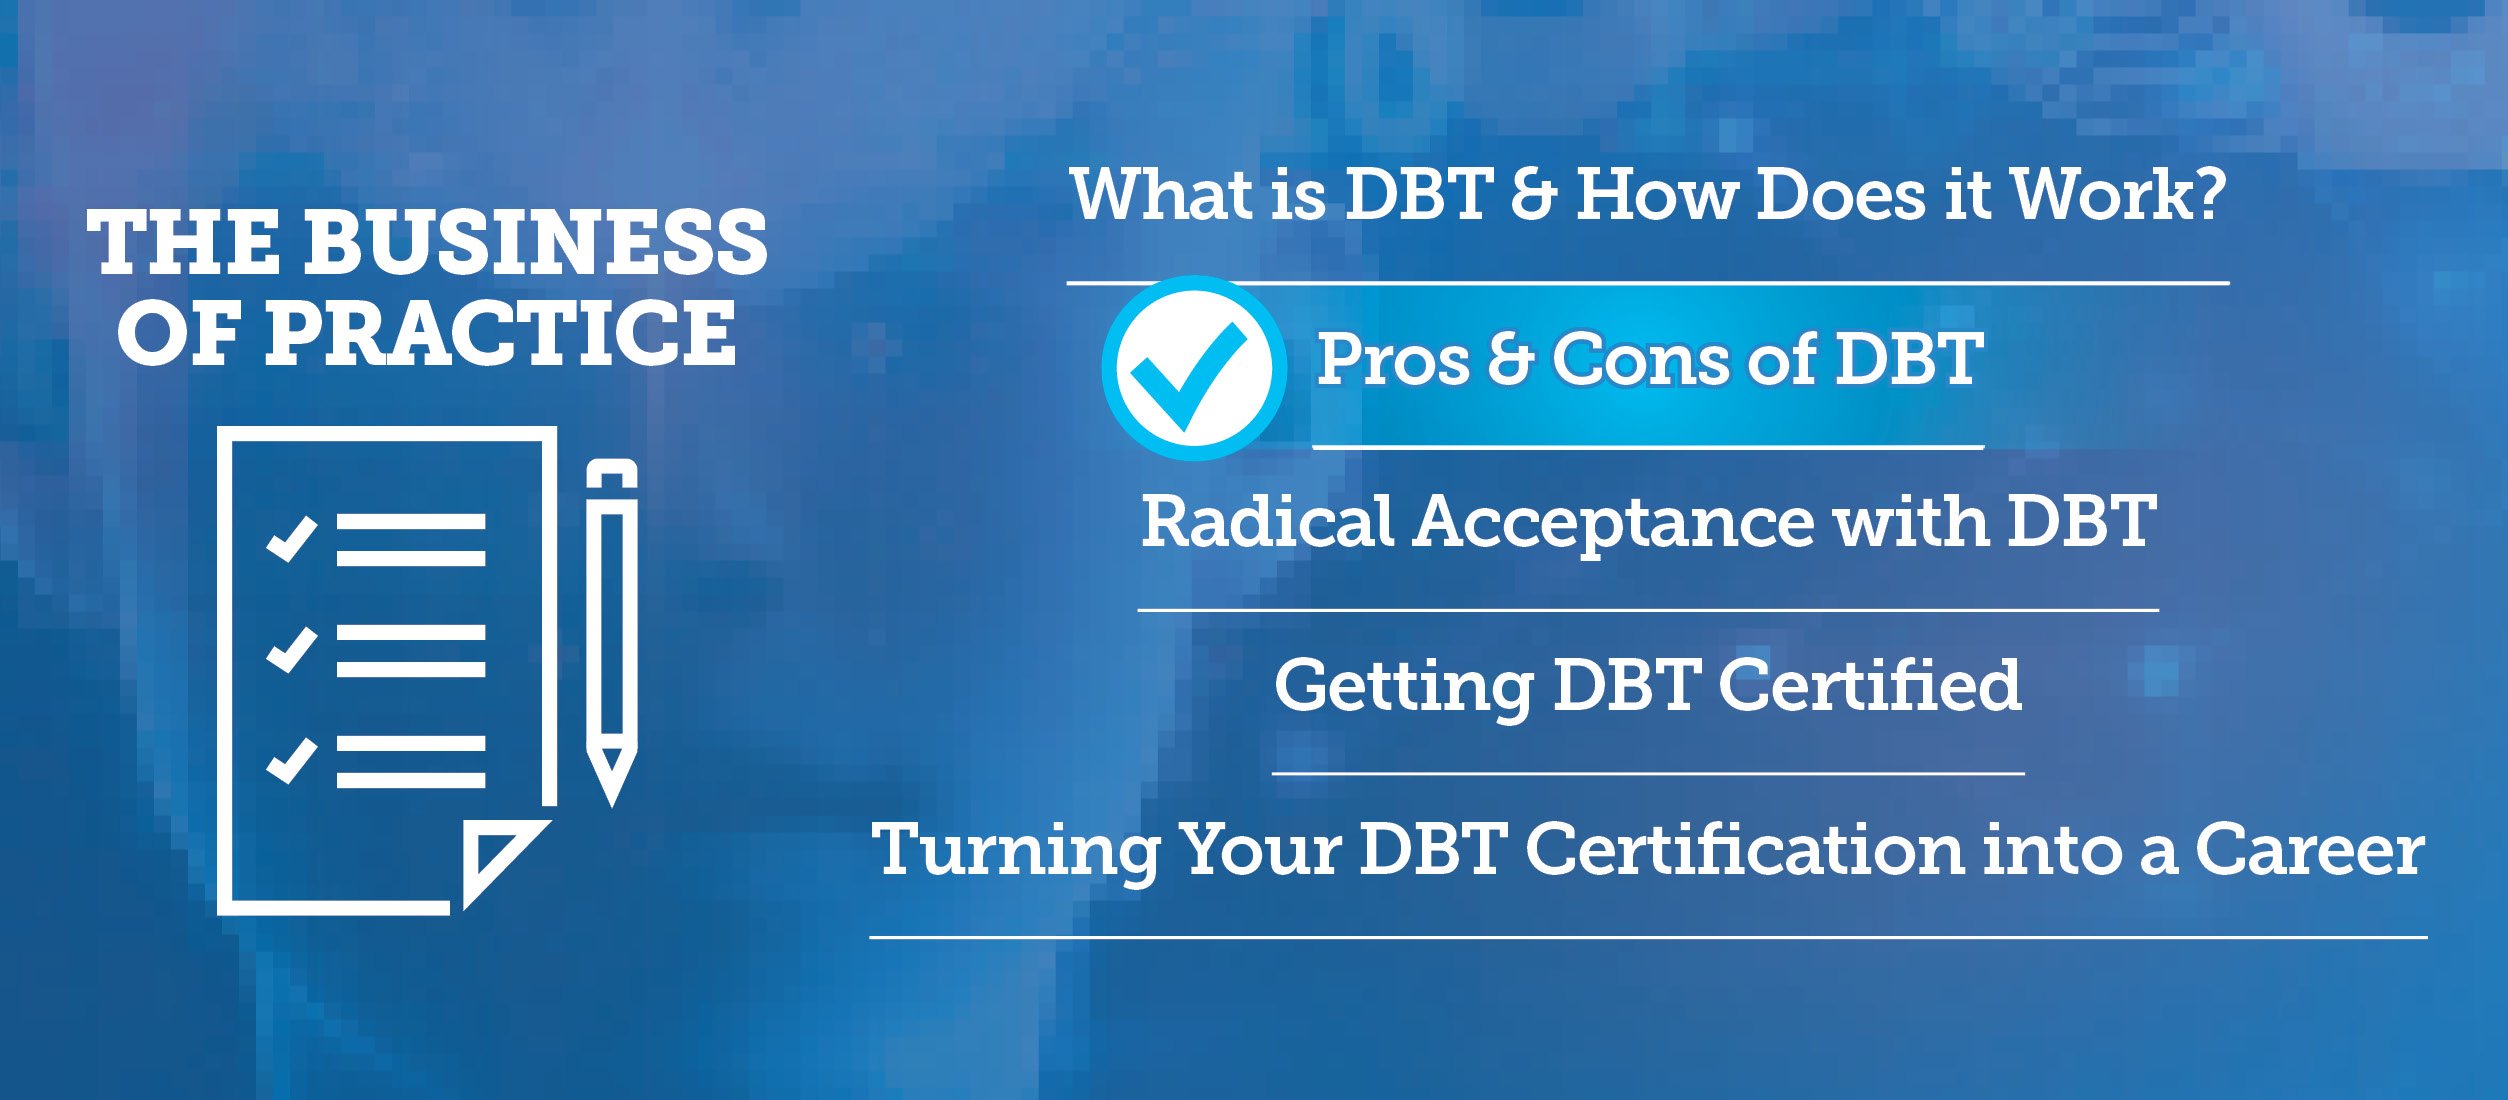 Pros and Cons of DBT